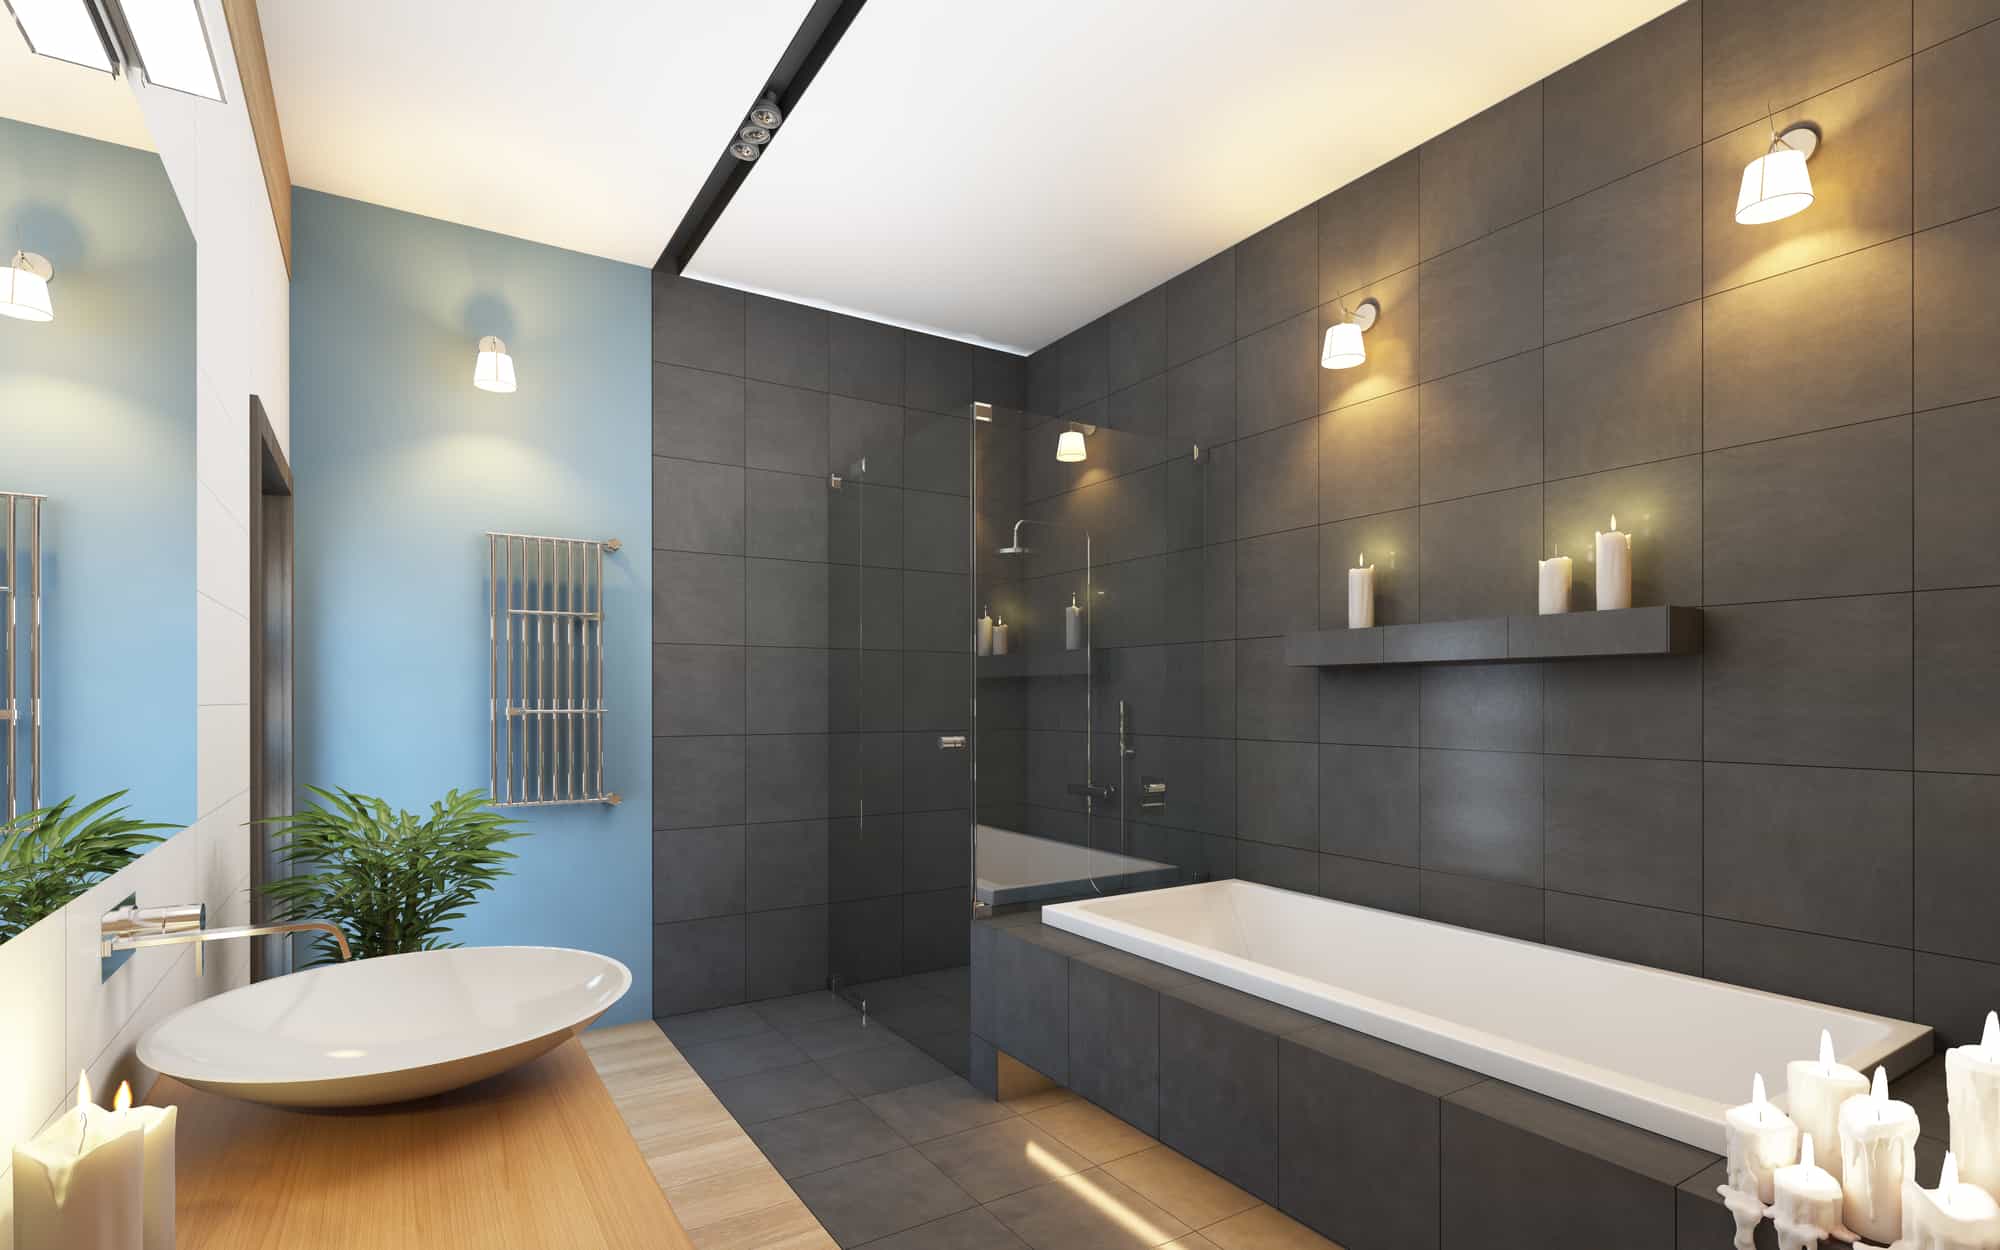 Modern bathroom with curbless glass roll-in corner shower and modern gray and blue colors